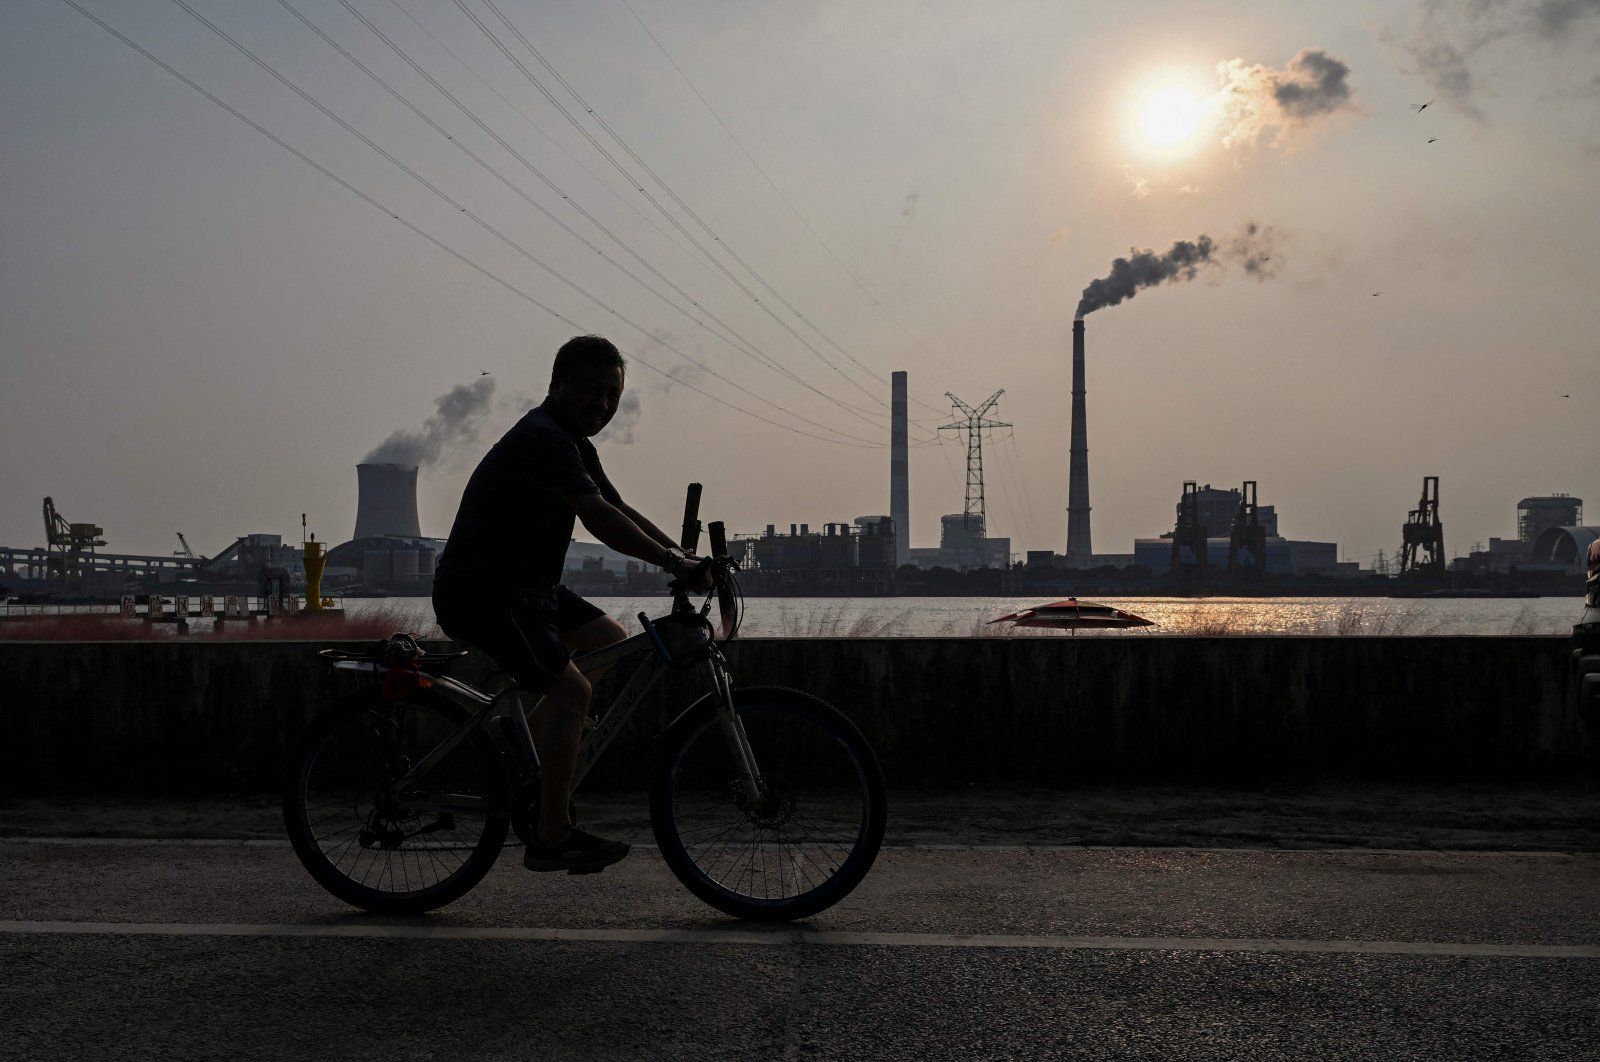 A man rides a bicycle on a promenade along the Huangpu river across from the Wujing Coal-Electricity Power Station in Shanghai, China, Sept. 28, 2021. (AFP Photo)